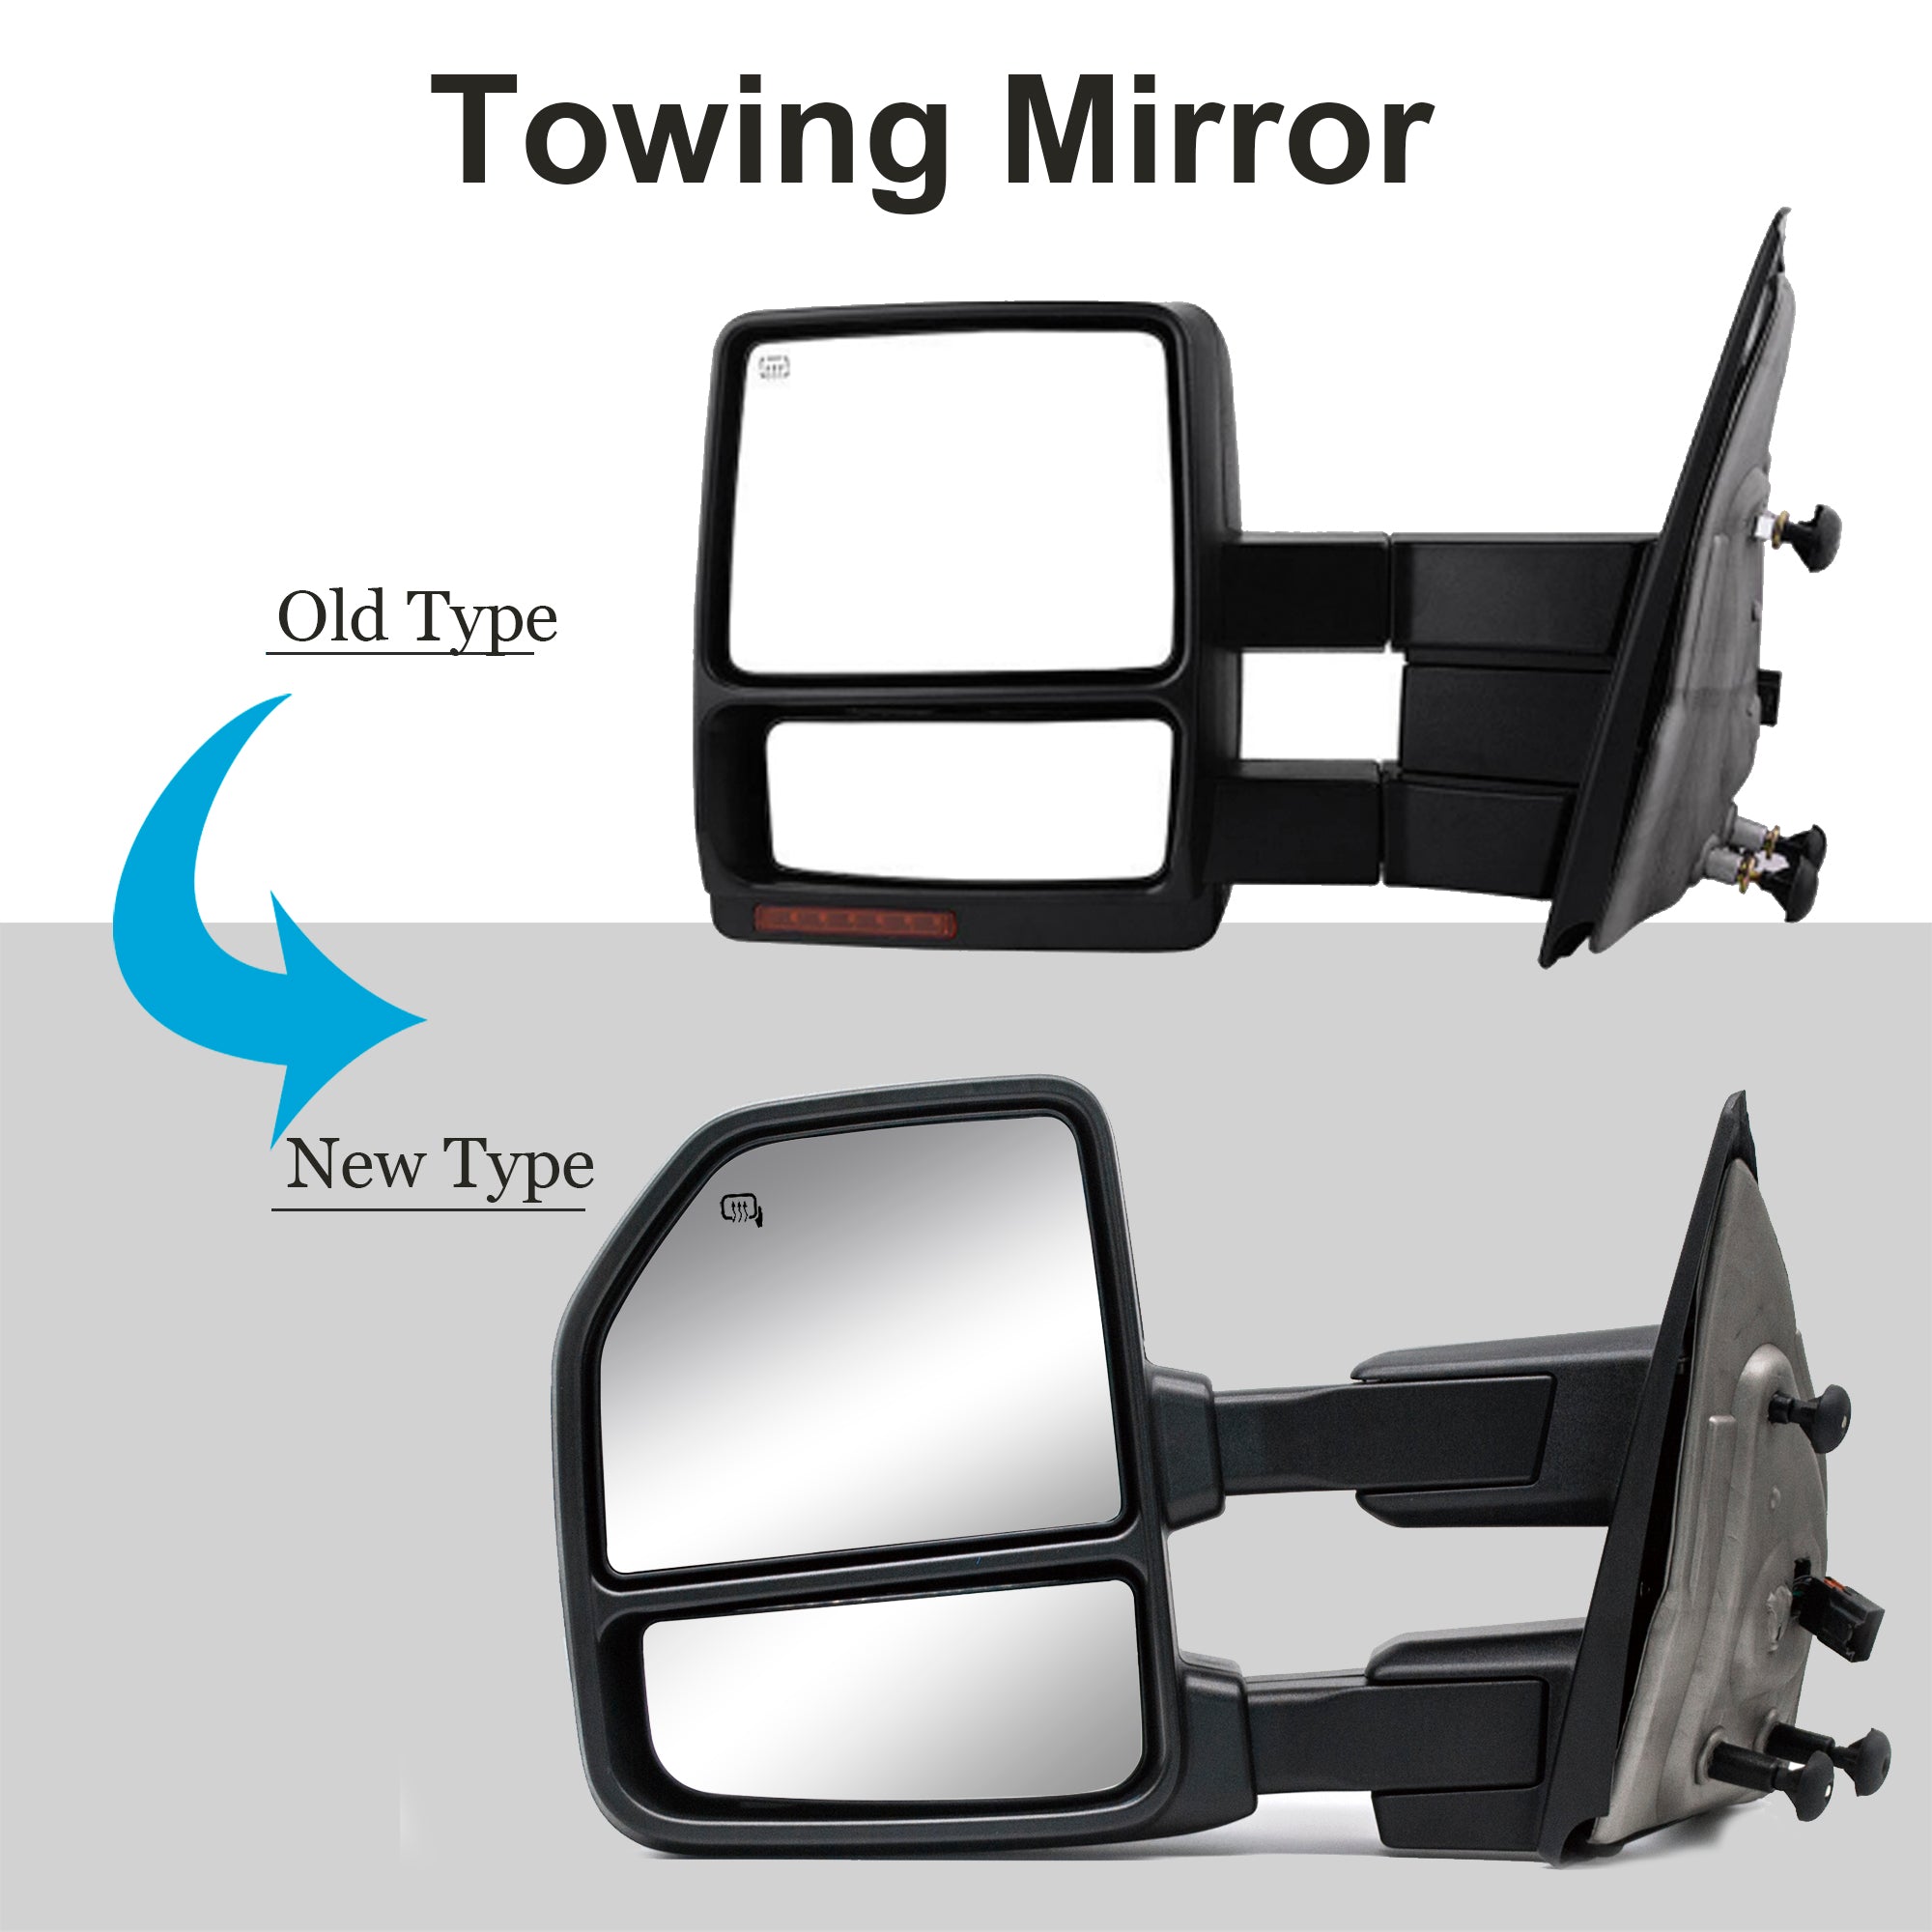 Towing Mirrors for 2004-2014 Ford F150 Power Heated Turn Signal Puddle Lamp 19B